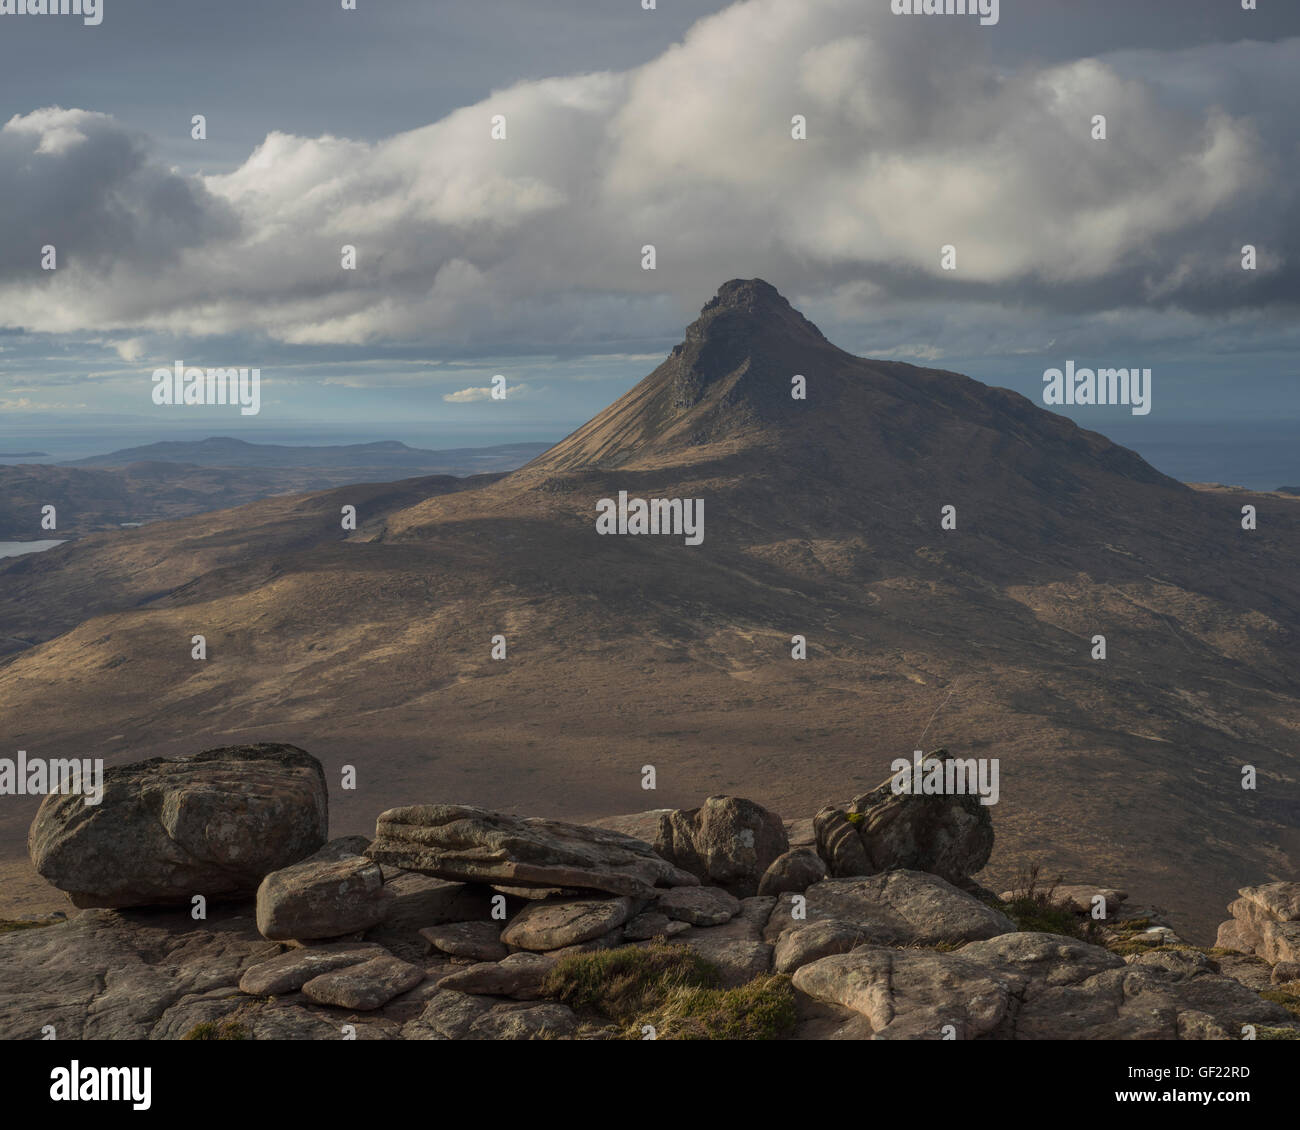 A view of the mountain Stac Pollaidh from the slopes of Cul Beag, Sutherland, Scotland, Scottish Highlands UK Stock Photo